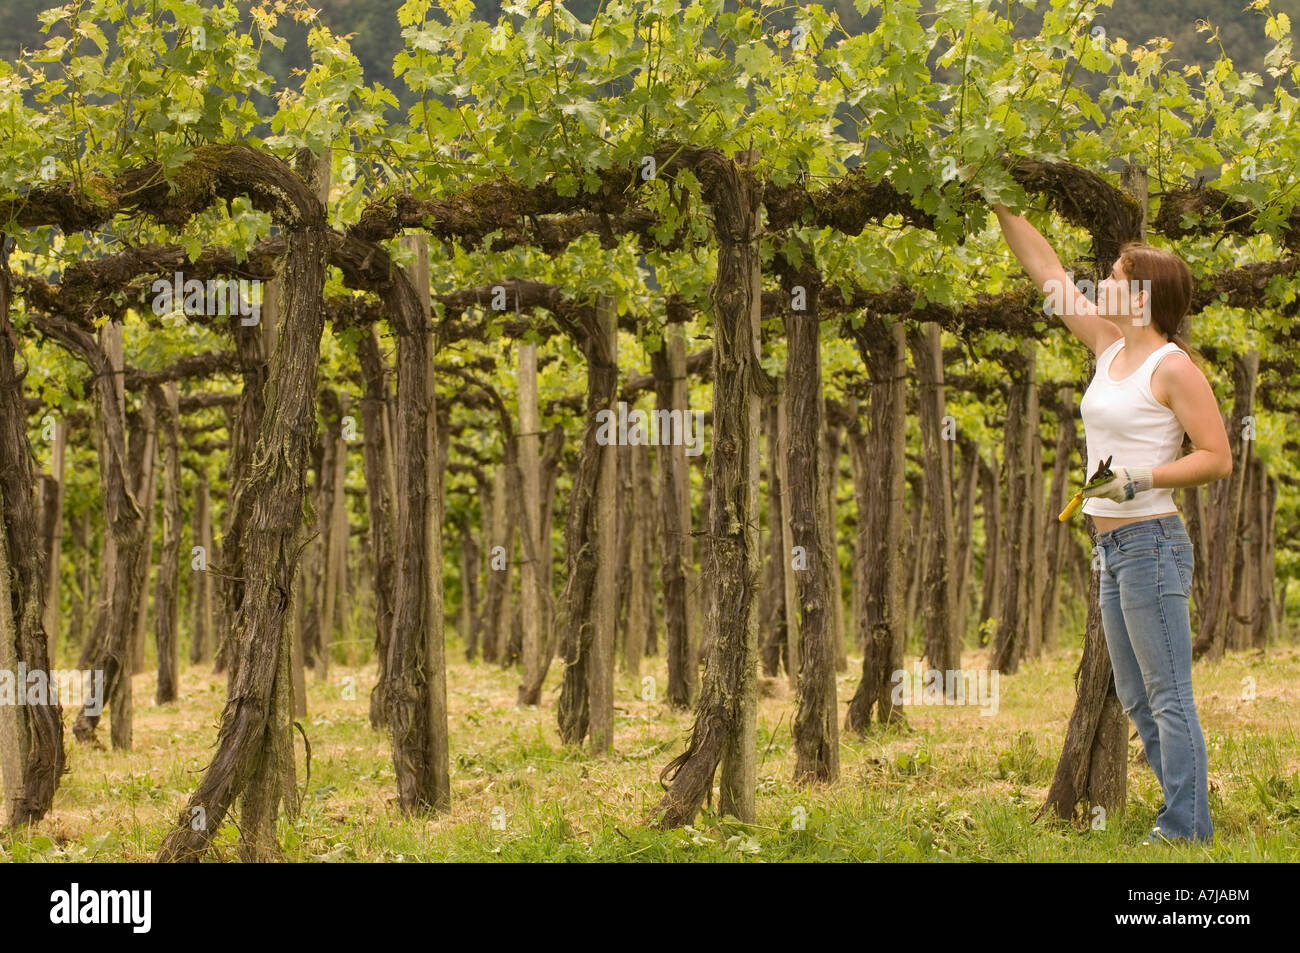 Woman manages canopy of grape vines at Champagne Cellars Vineyard, Applegate Valley, Southern Oregon Stock Photo